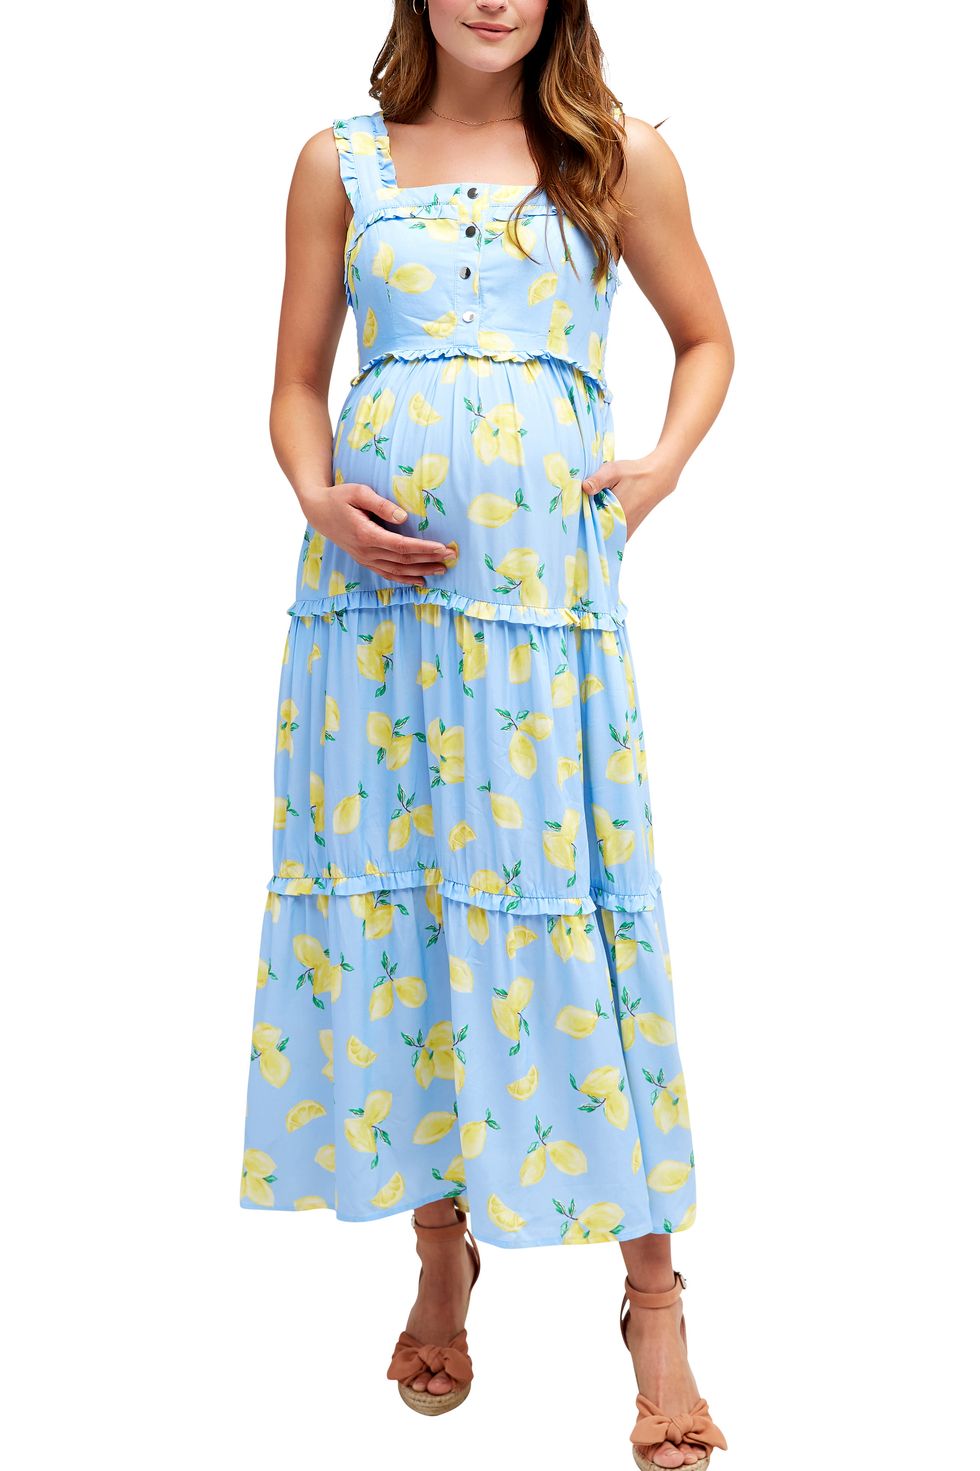 Maternity Clothing, Nursing & Pregnancy Outfits